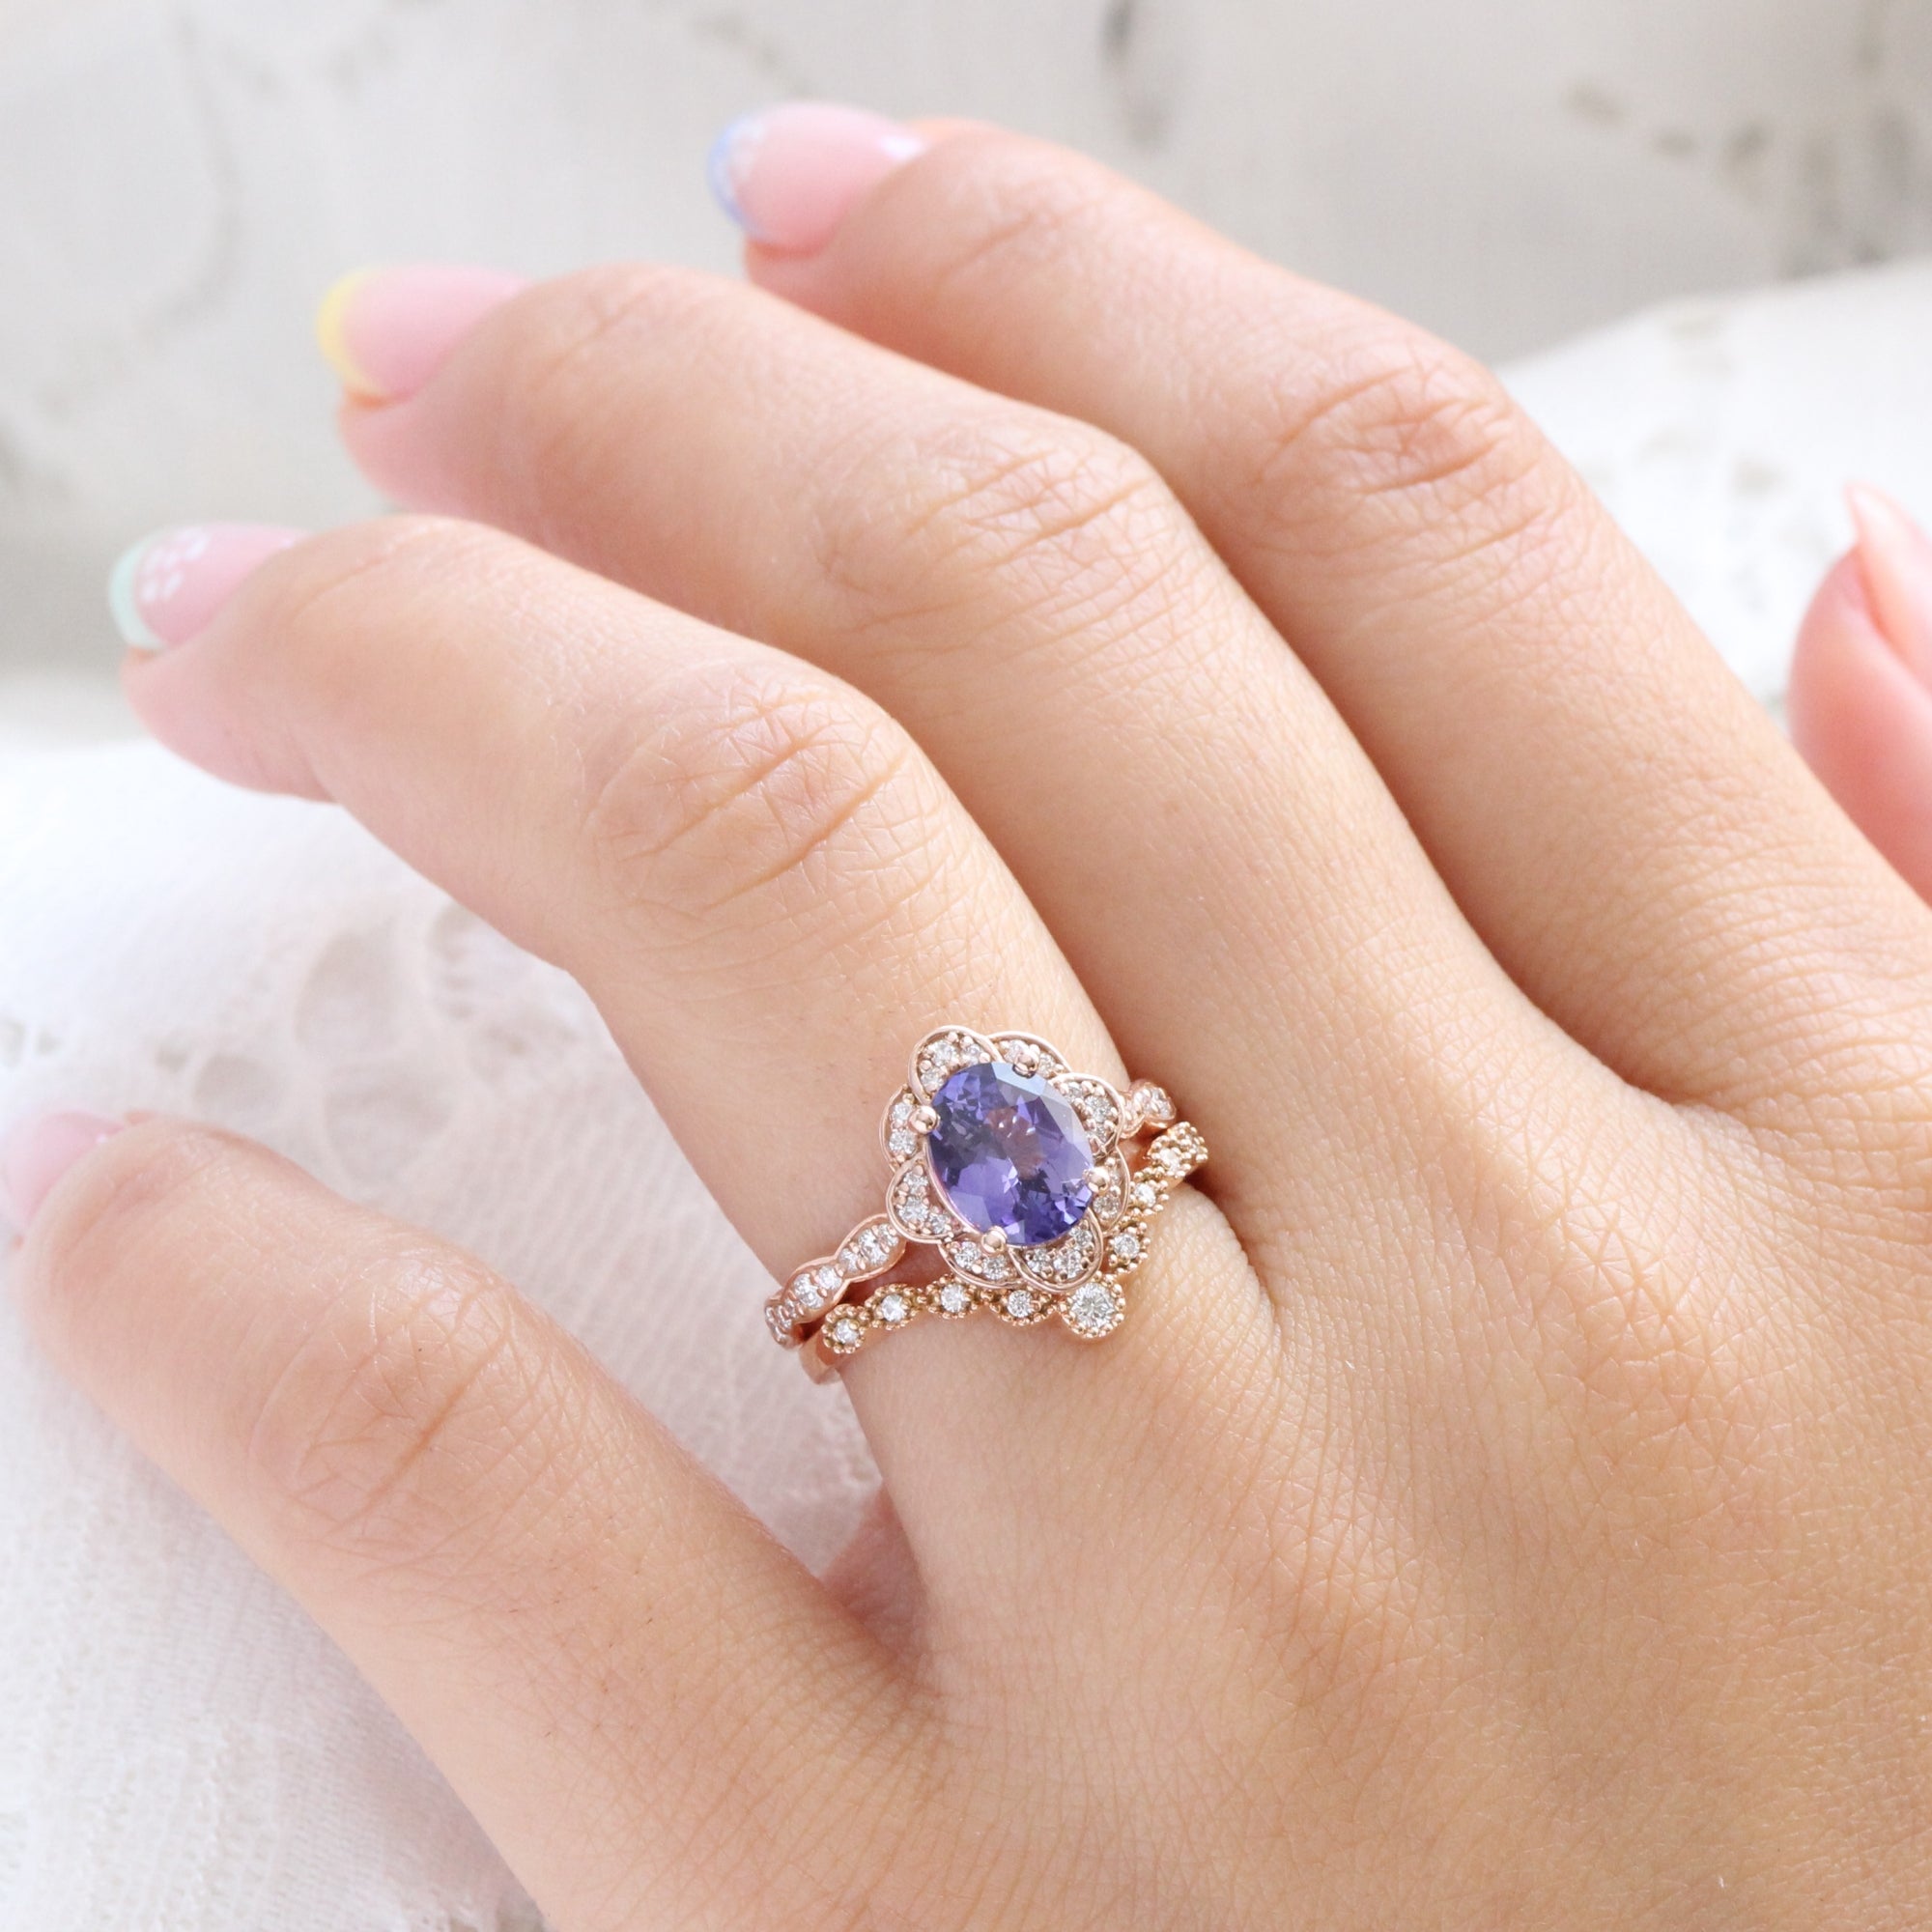 Oval purple sapphire diamond ring rose gold vintage floral sapphire ring la more design jewelry